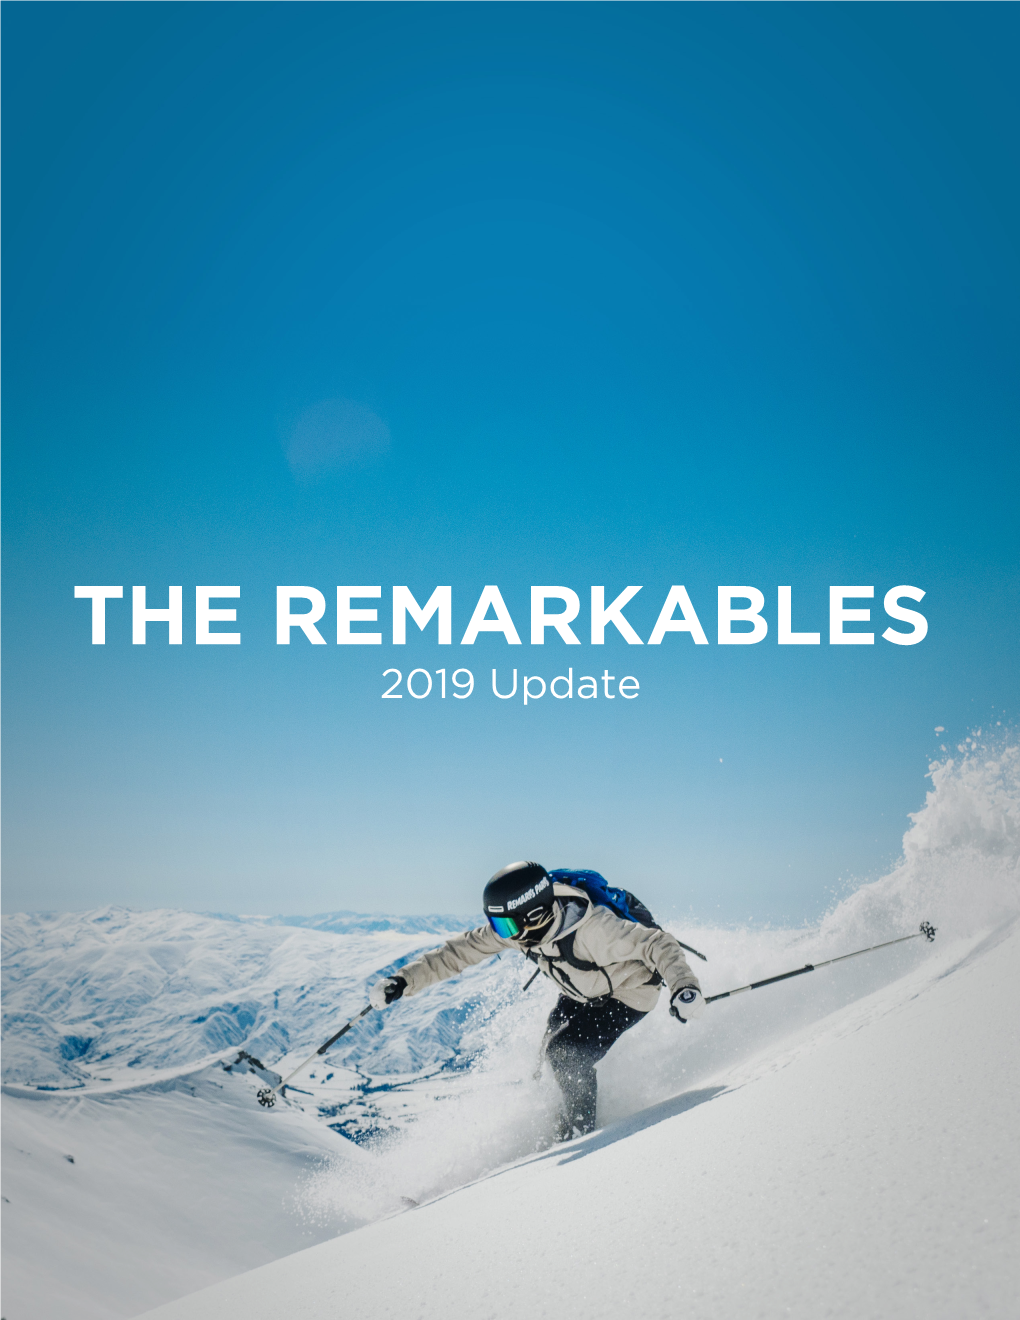 THE REMARKABLES 2019 Update Find Your Freedom